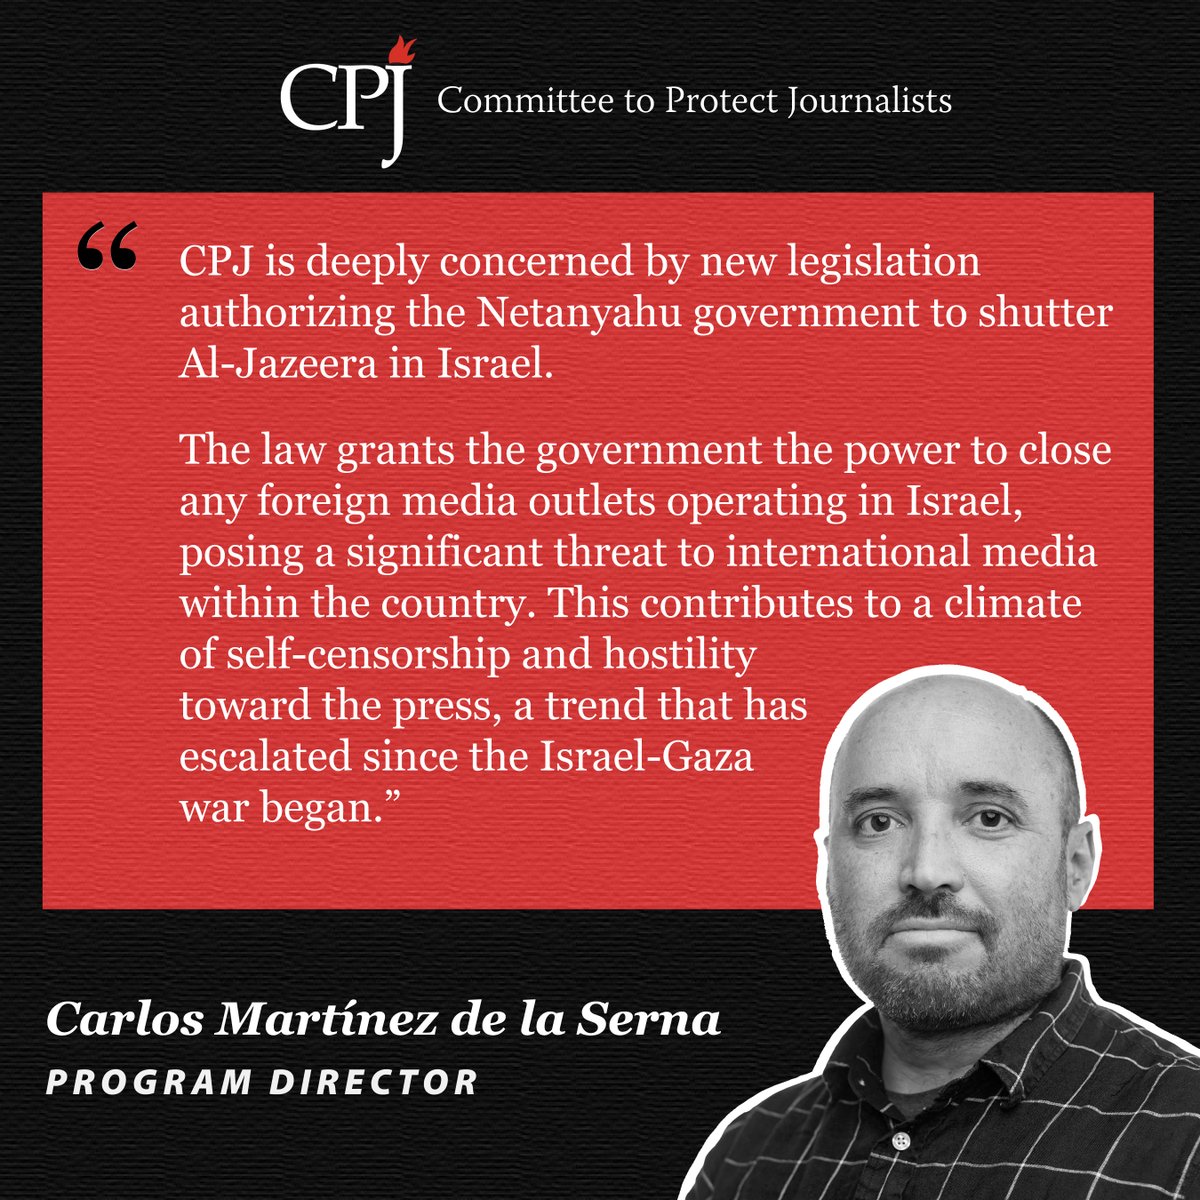 CPJ is deeply concerned by new legislation authorizing the Netanyahu government to shutter @AlJazeera in #Israel. The law grants the government the power to close any foreign media outlets operating in Israel, posing a significant threat to international media within the…